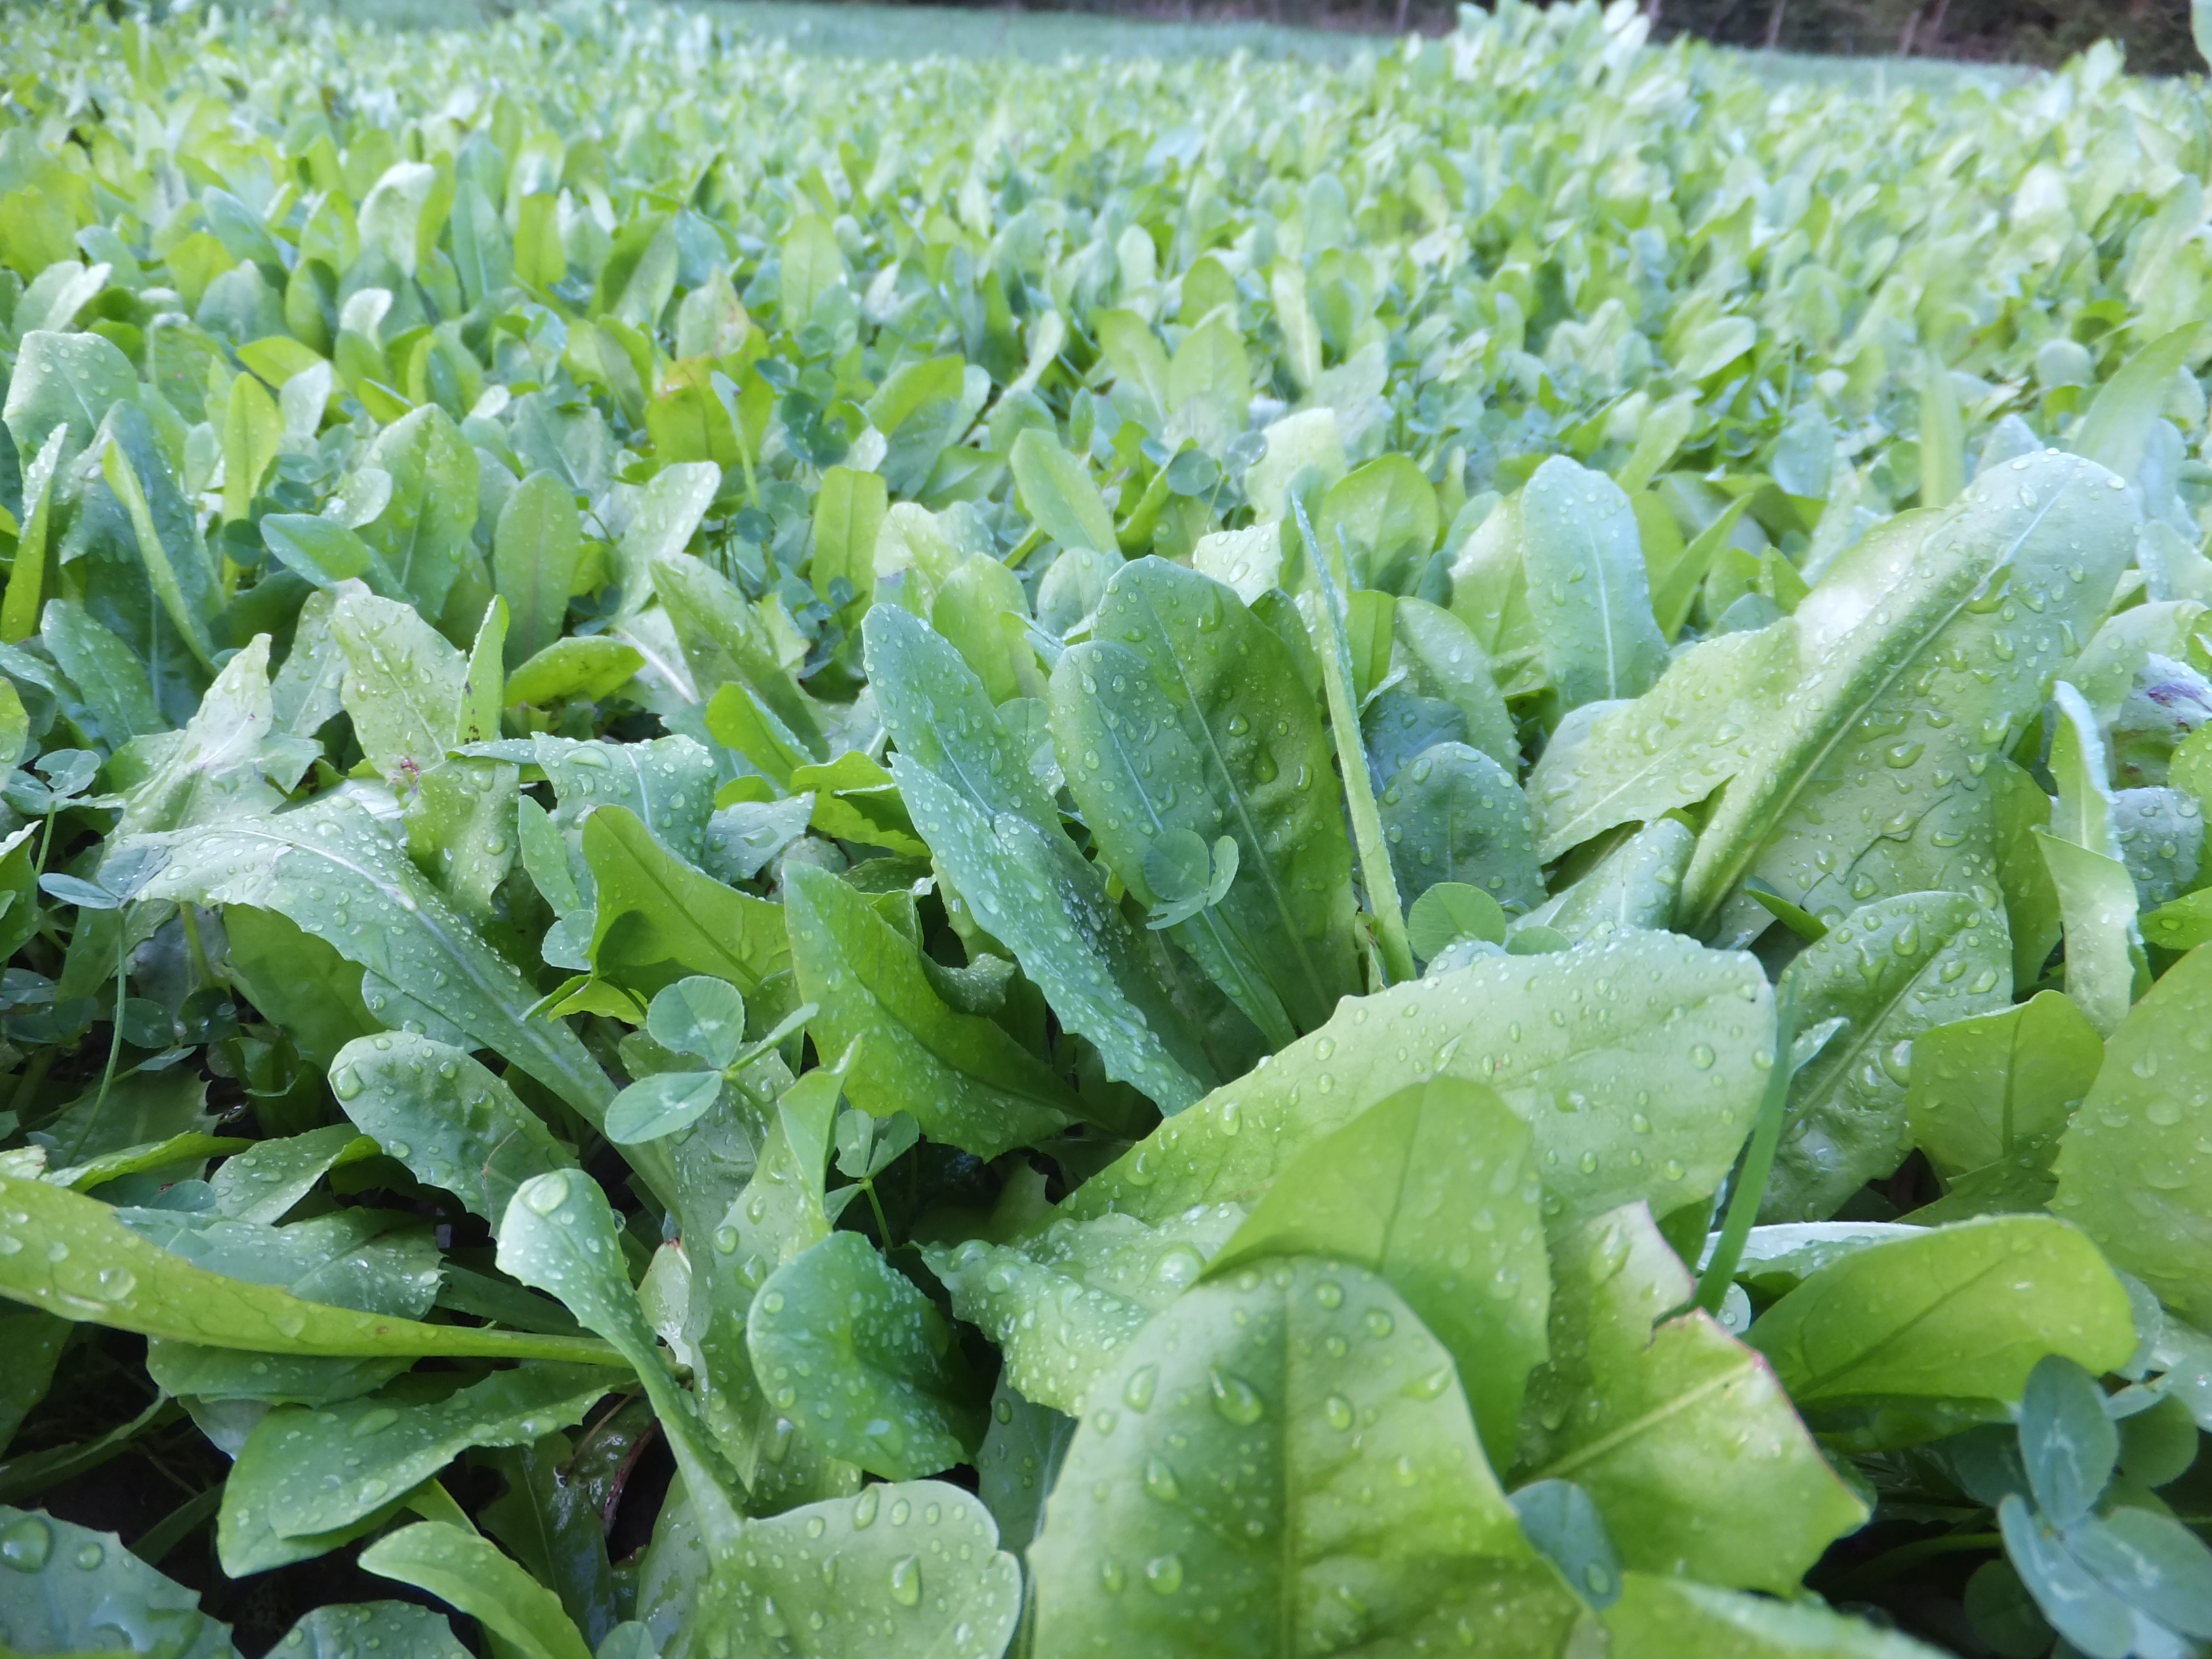 Forage chicory and plantain included in the Lambtastic mixture